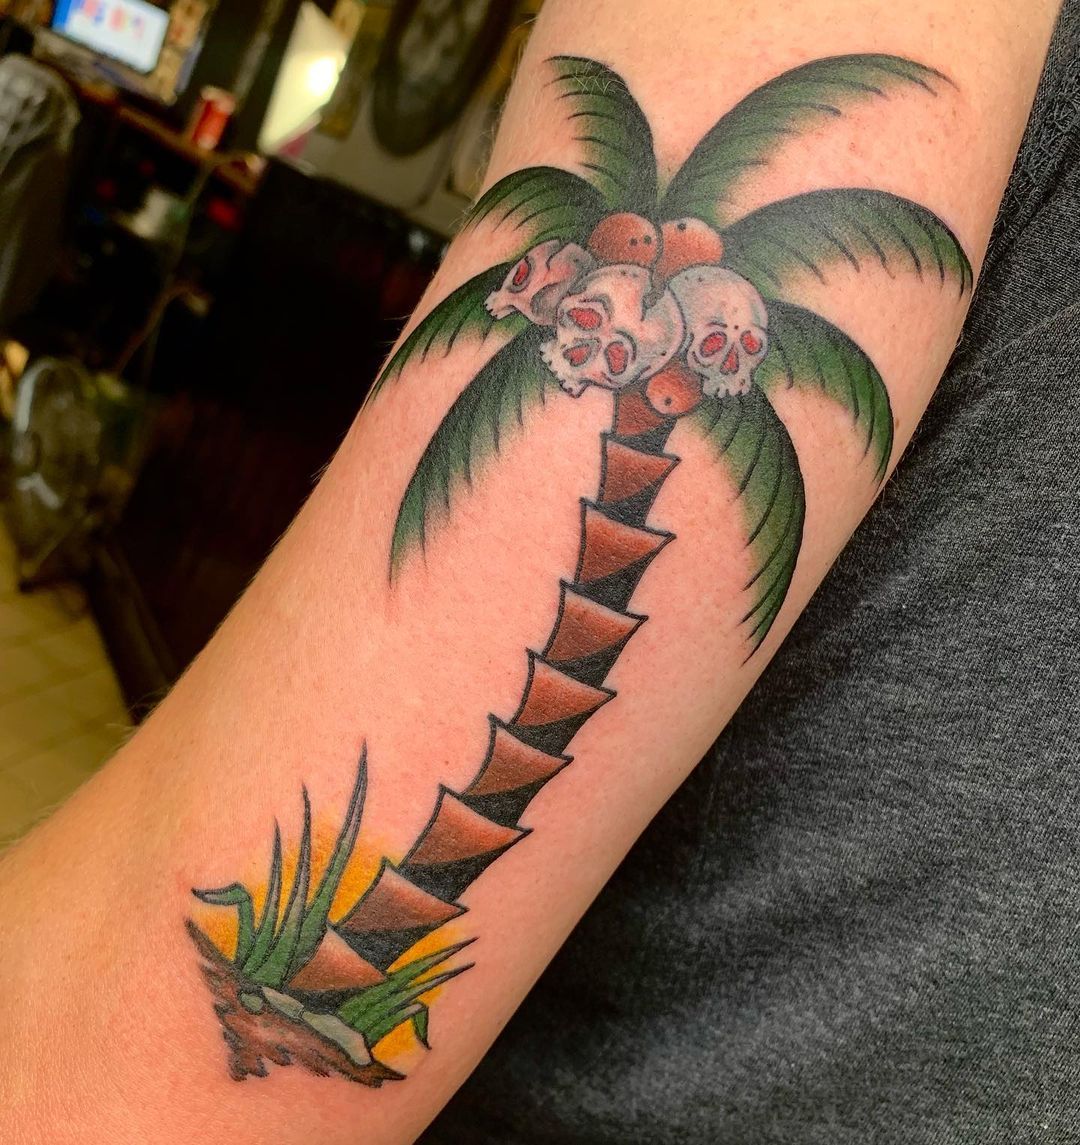 Started my leg sleeve Still healing Sunset with a palm tree and Maui in  the background Done by Tony Muchi  Skin Deep Tattoo in Lahaina HI  r tattoos